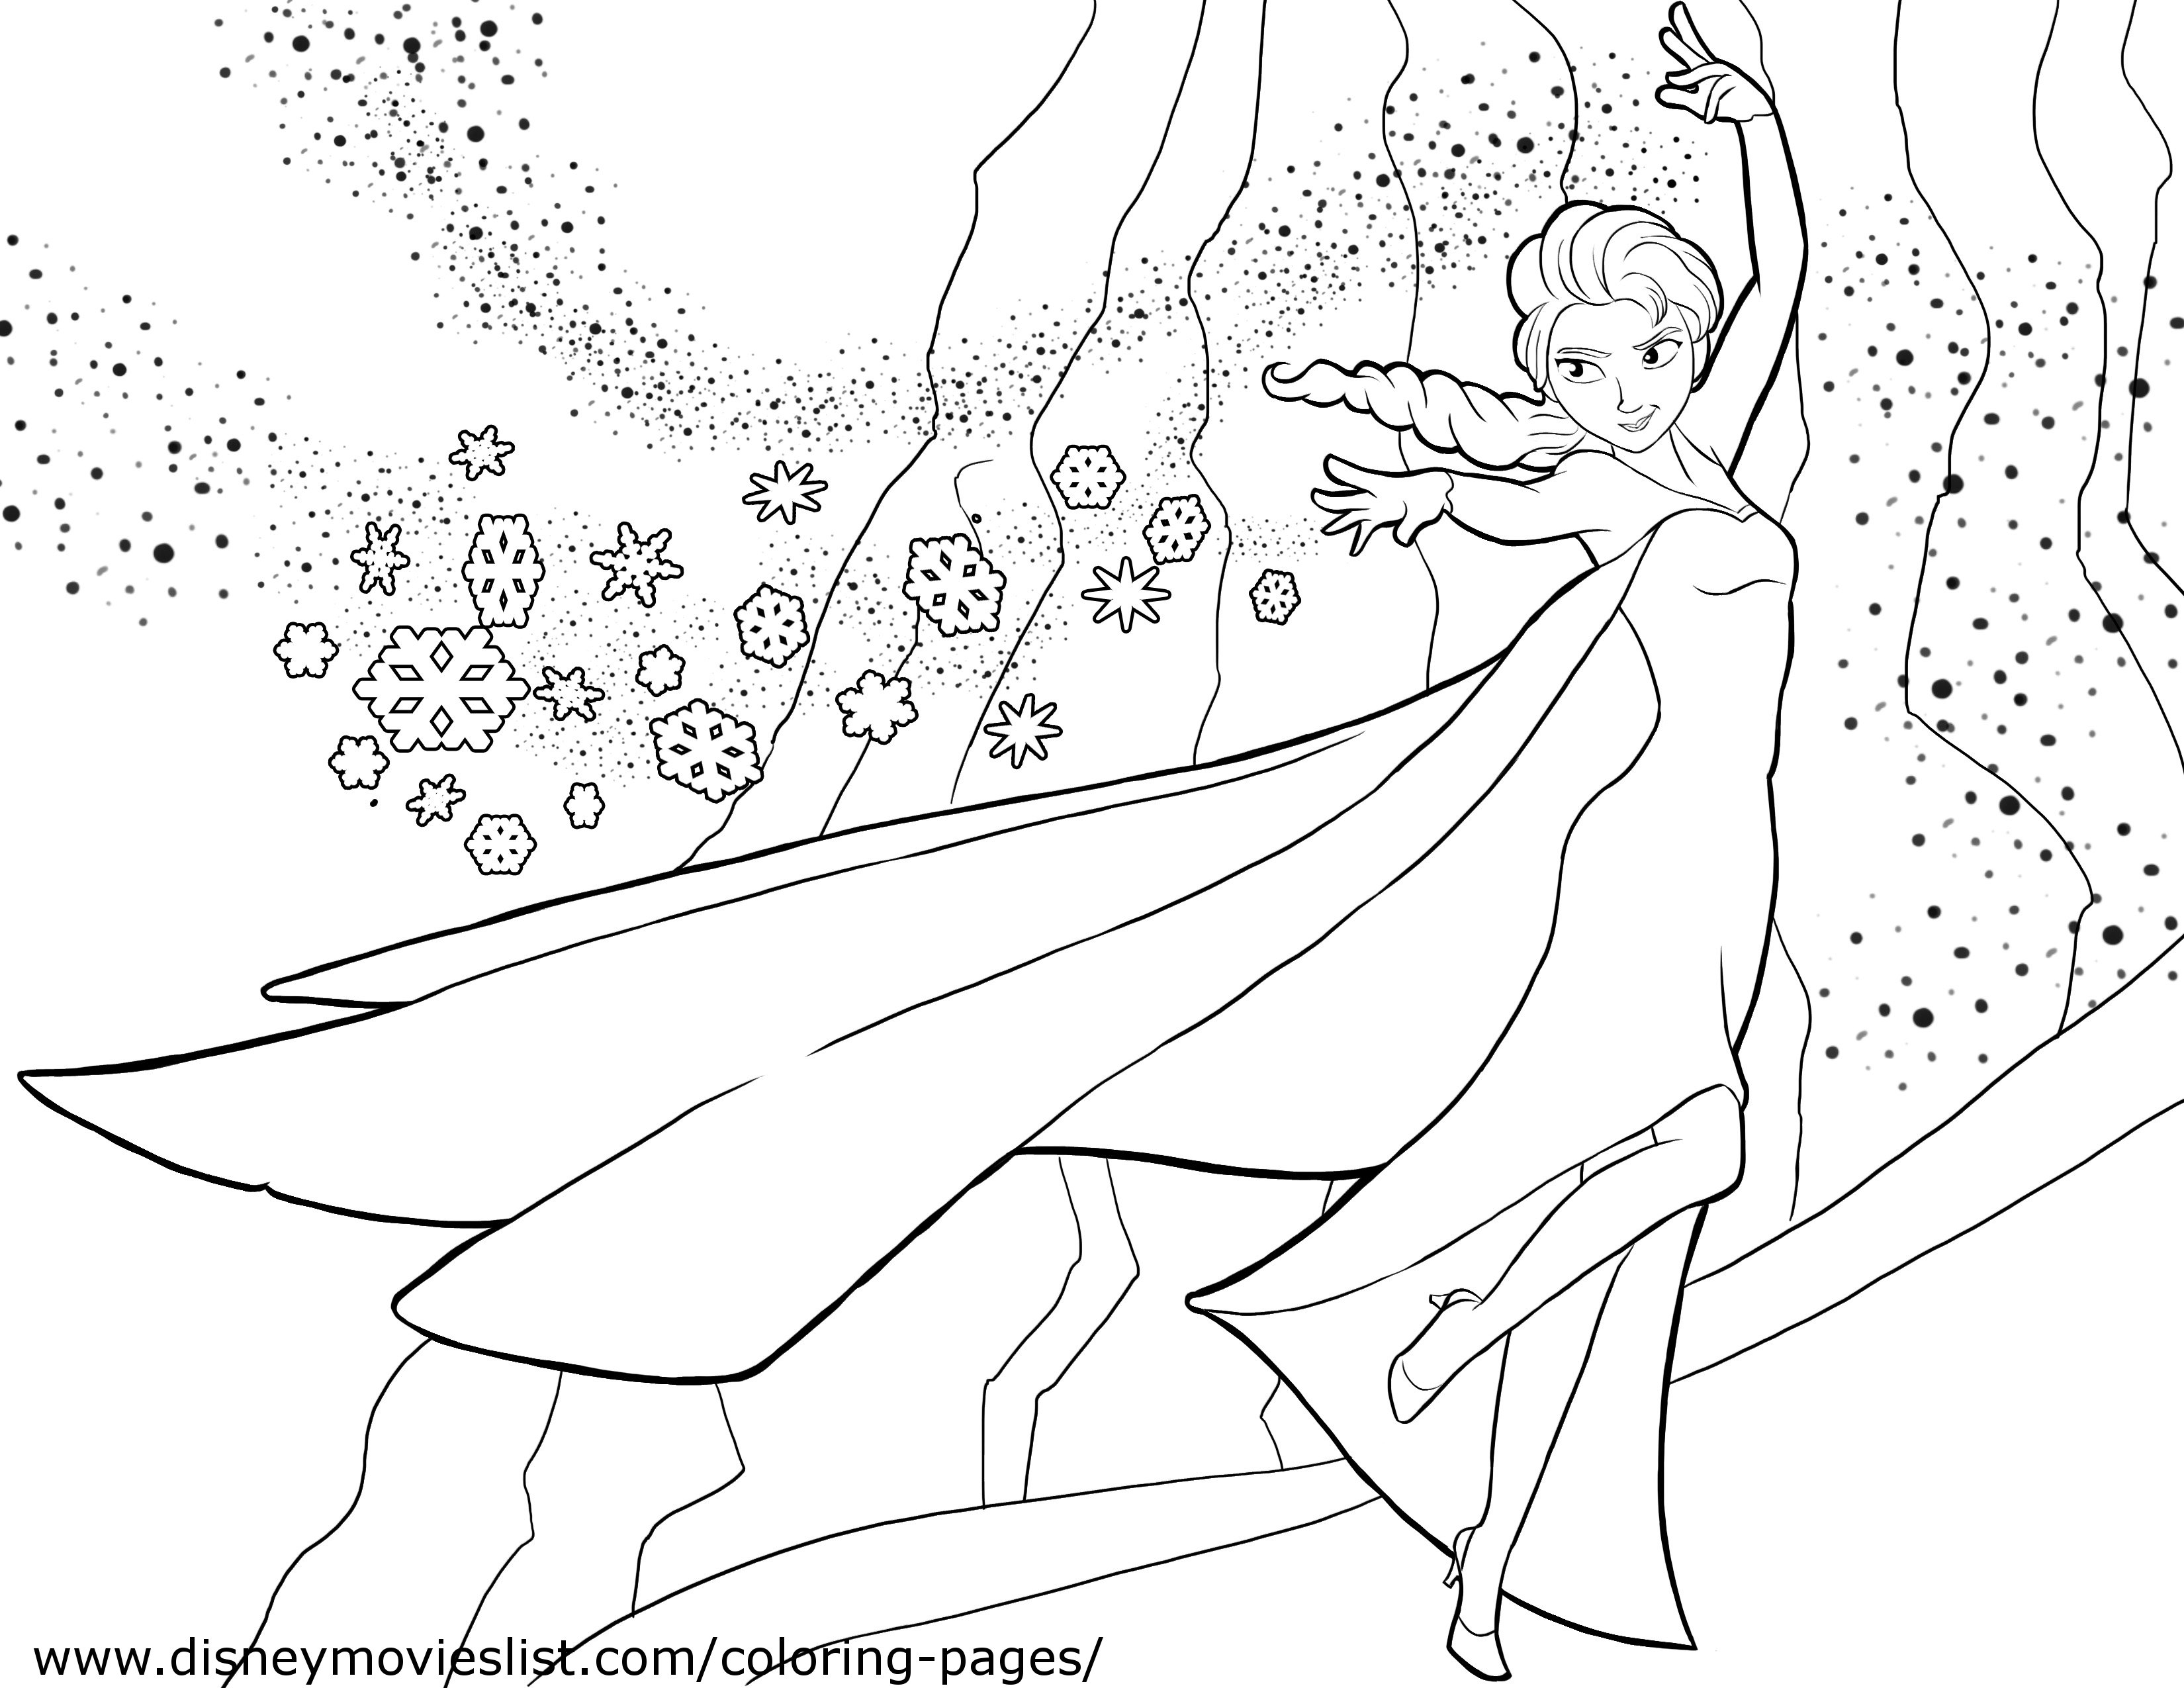 Frozen coloring #5, Download drawings